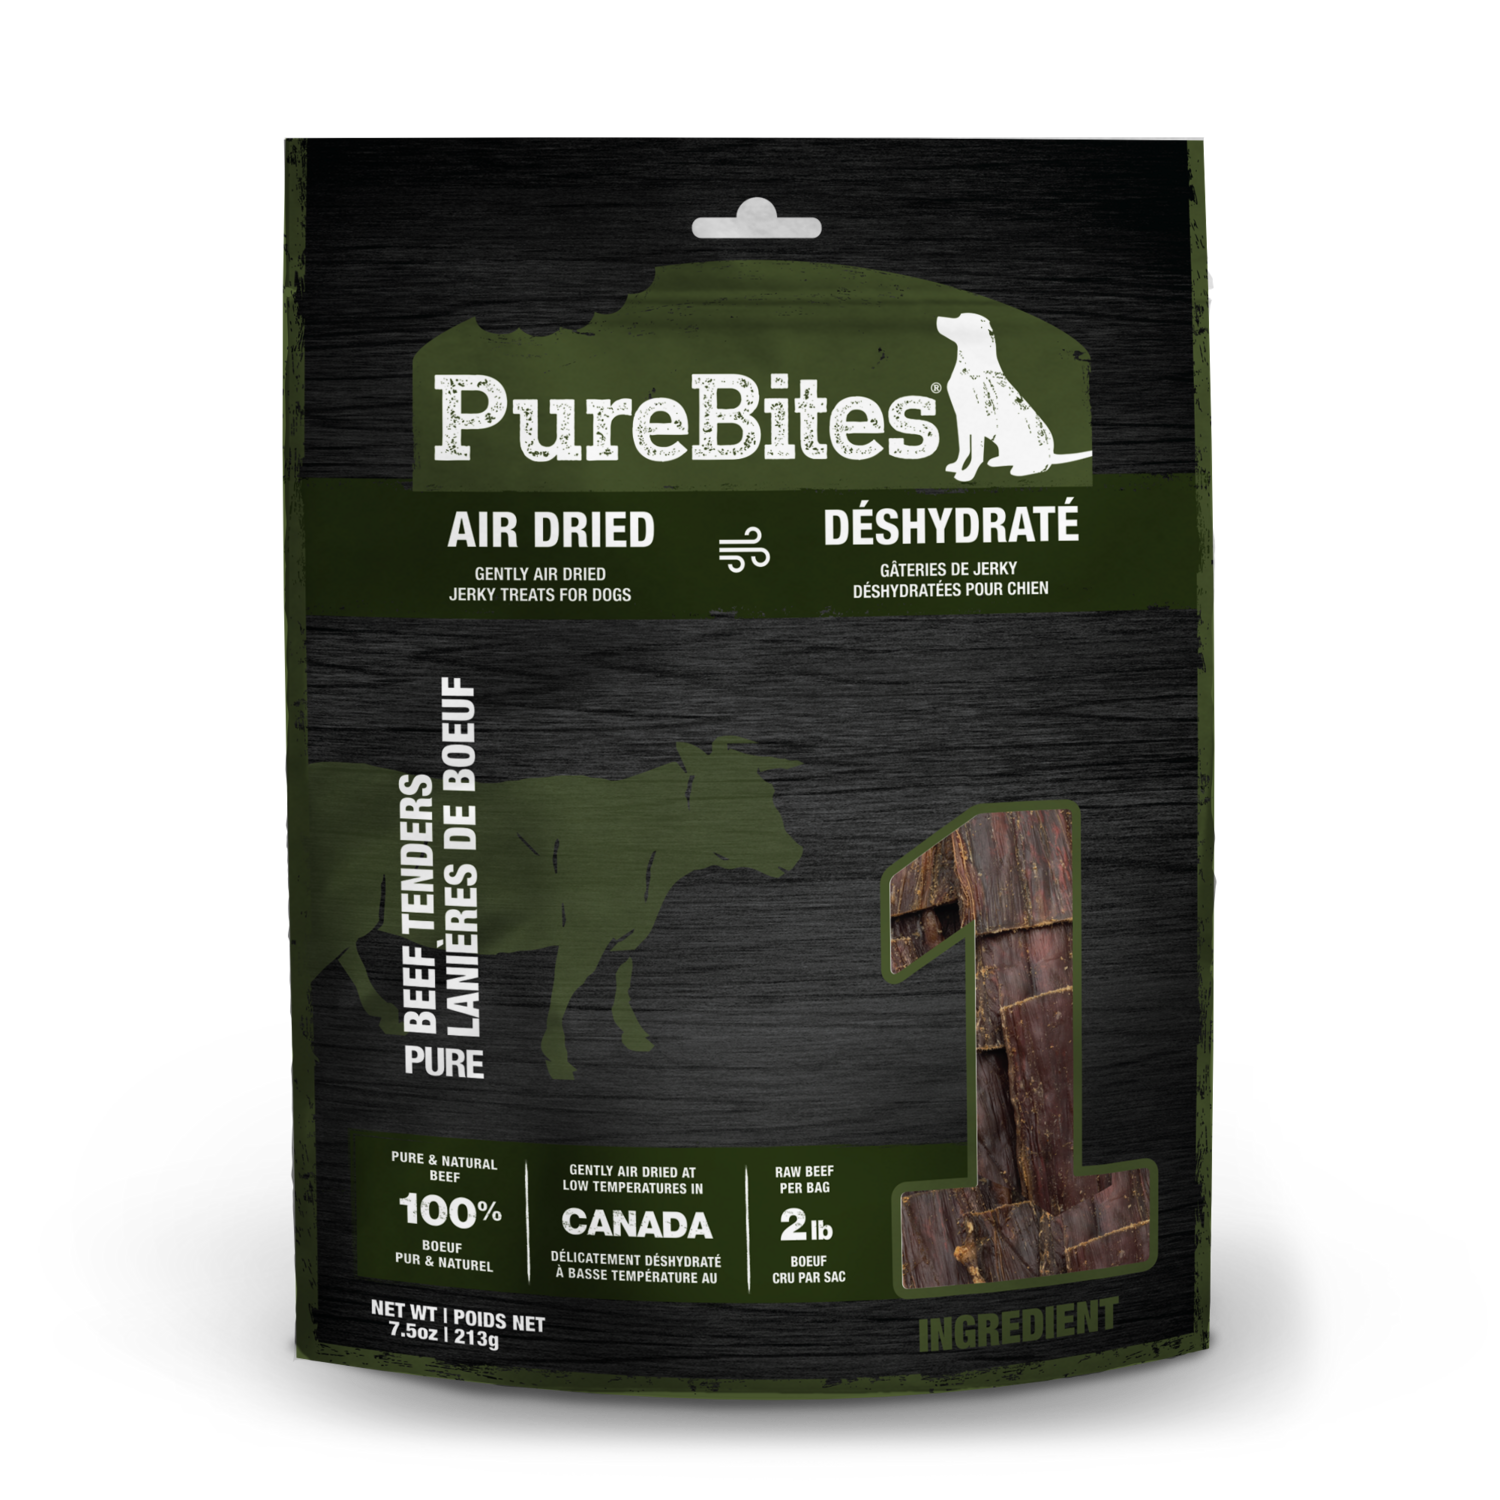 PUREBITES BEEF JERKY FOR DOGS - 213G - 牛肉干 狗狗零食